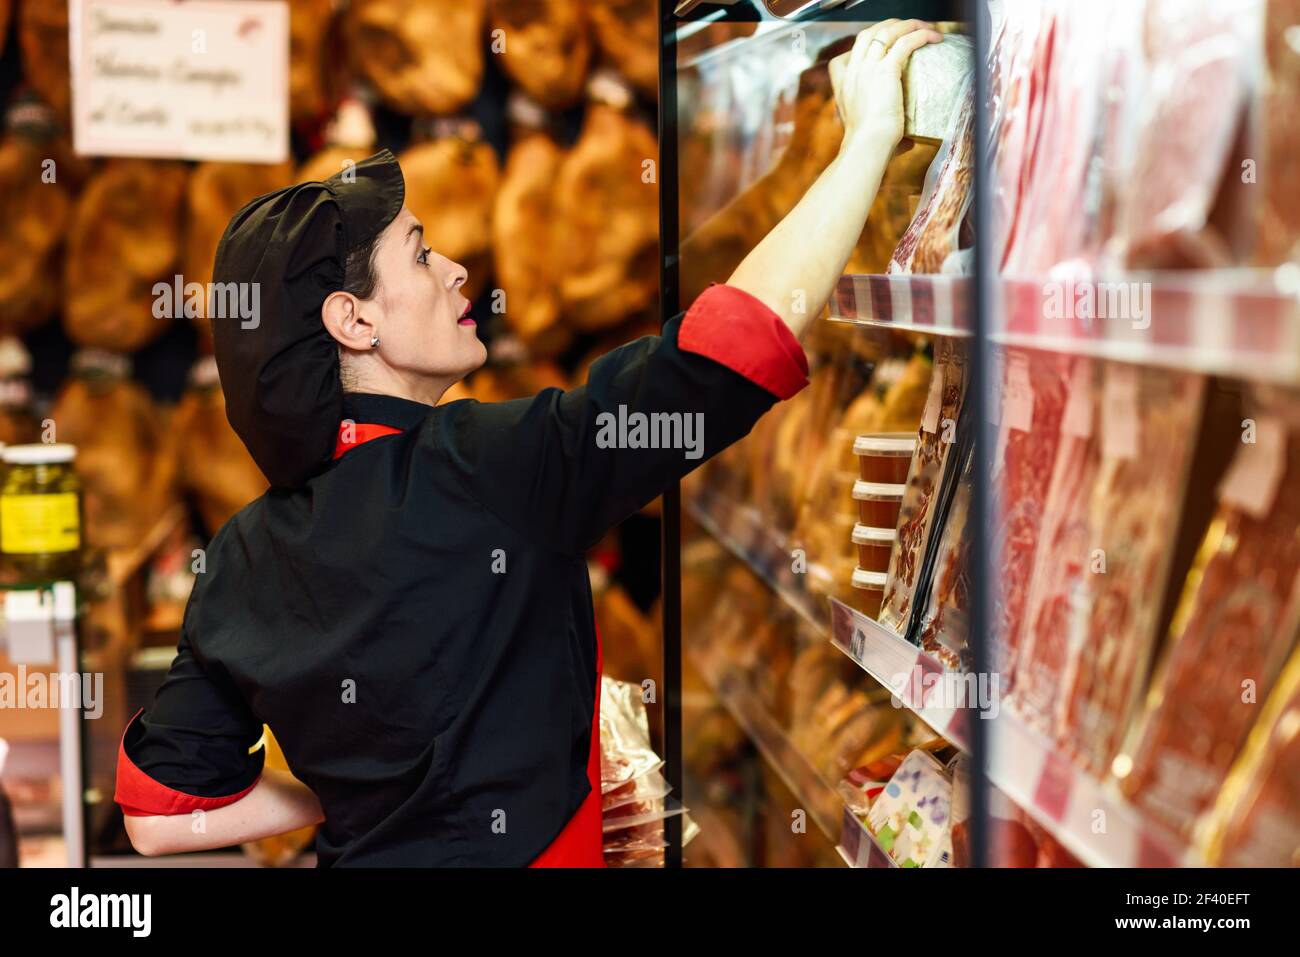 Portrait of female worker taking products in butcher shop. Refrigerated display case for sausage packages, ham and cheese Stock Photo